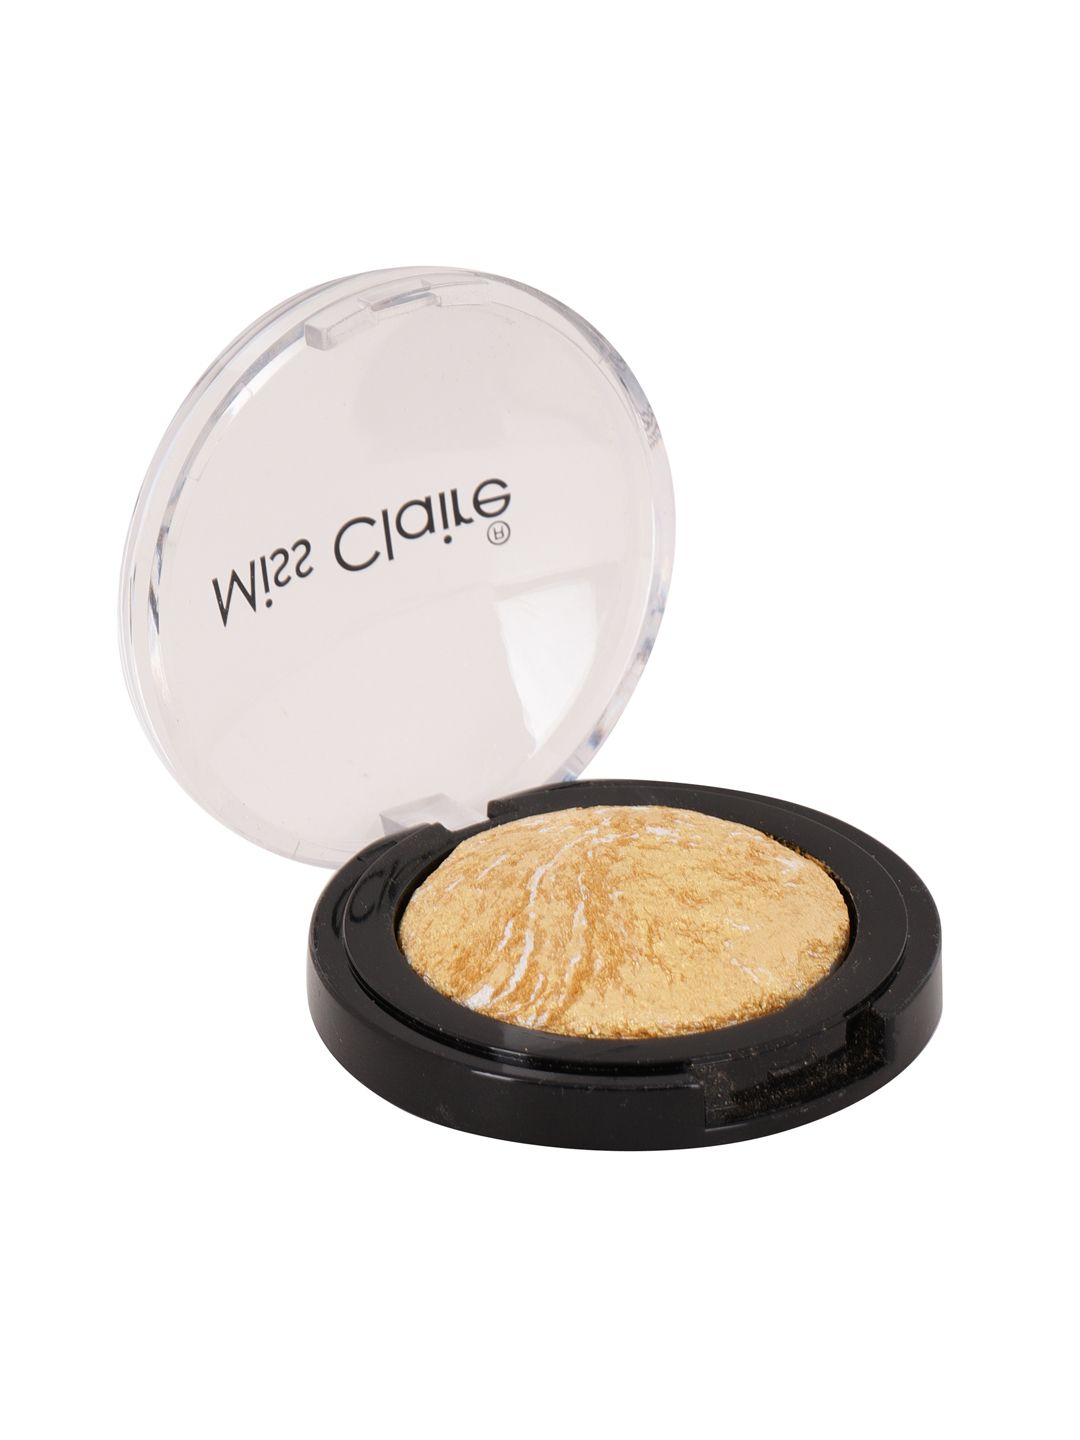 Miss Claire 06 Baked Duo Eyeshadow 3.5 g Price in India